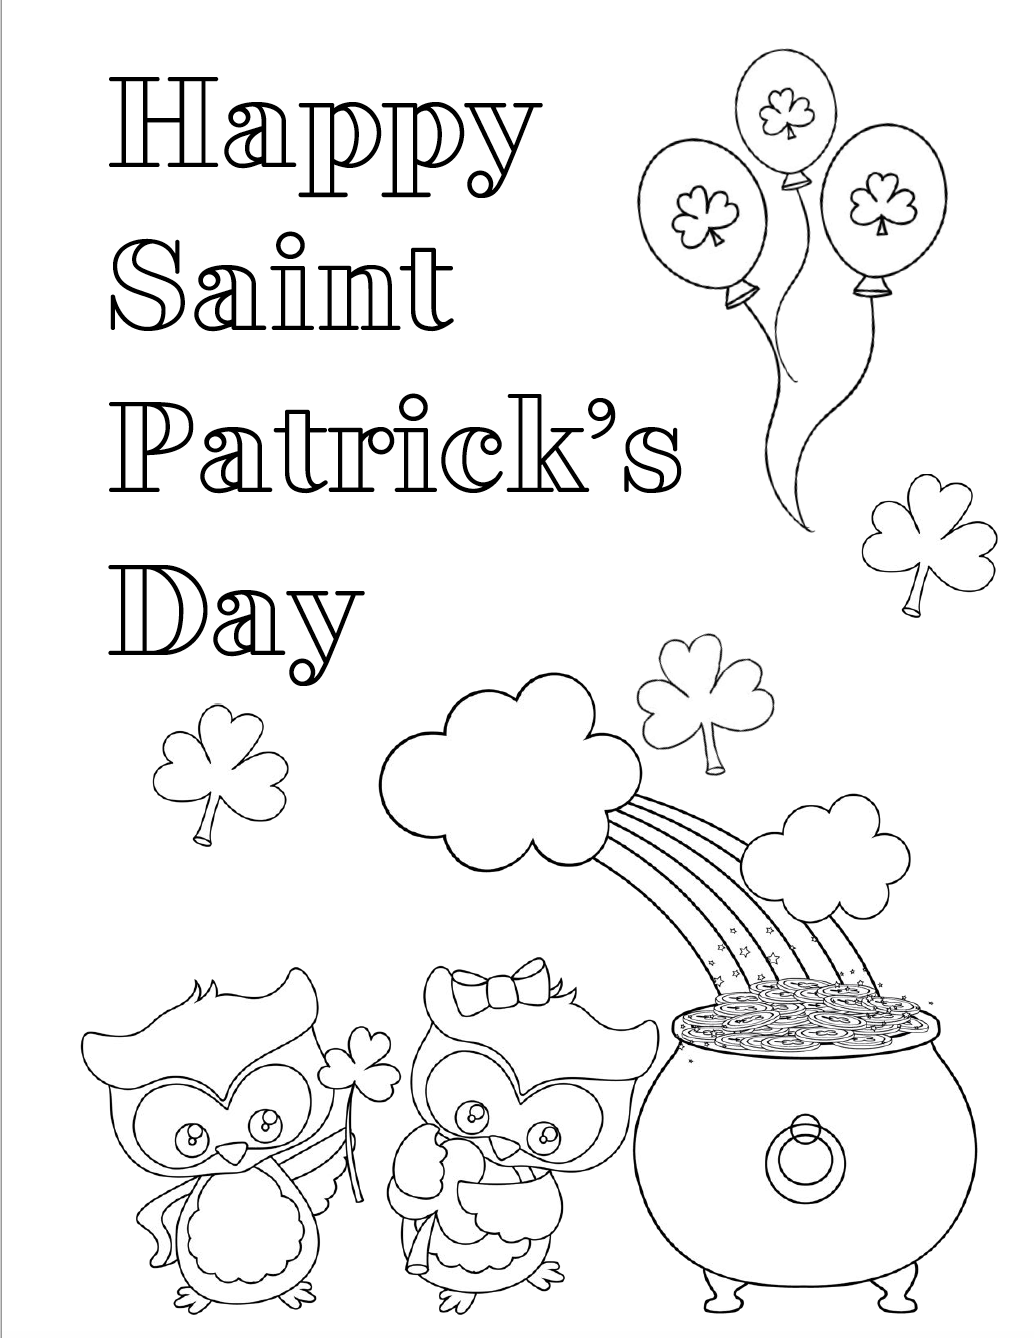 Free Printable St. Patrick's Day Coloring Pages: 4 Designs!